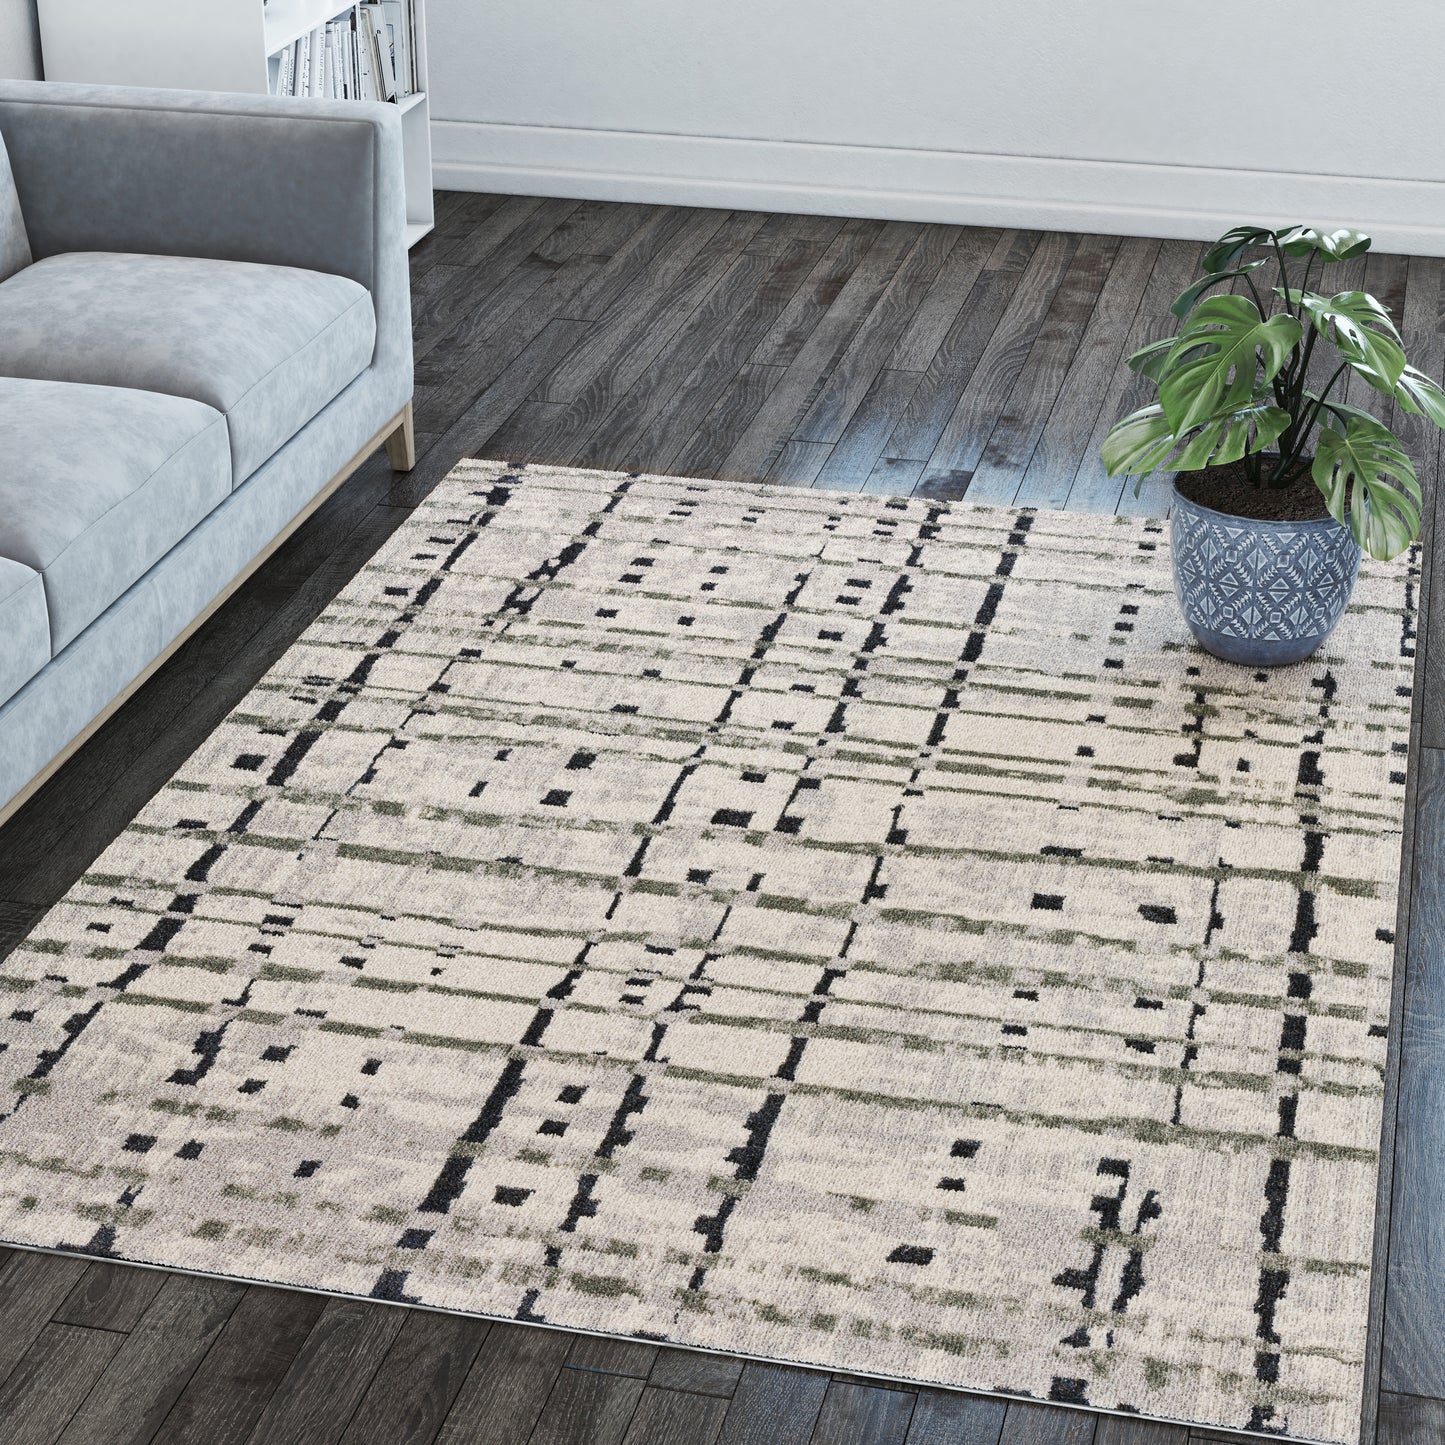 Karma KM4 Machine Woven Synthetic Blend Indoor Area Rug by Dalyn Rugs